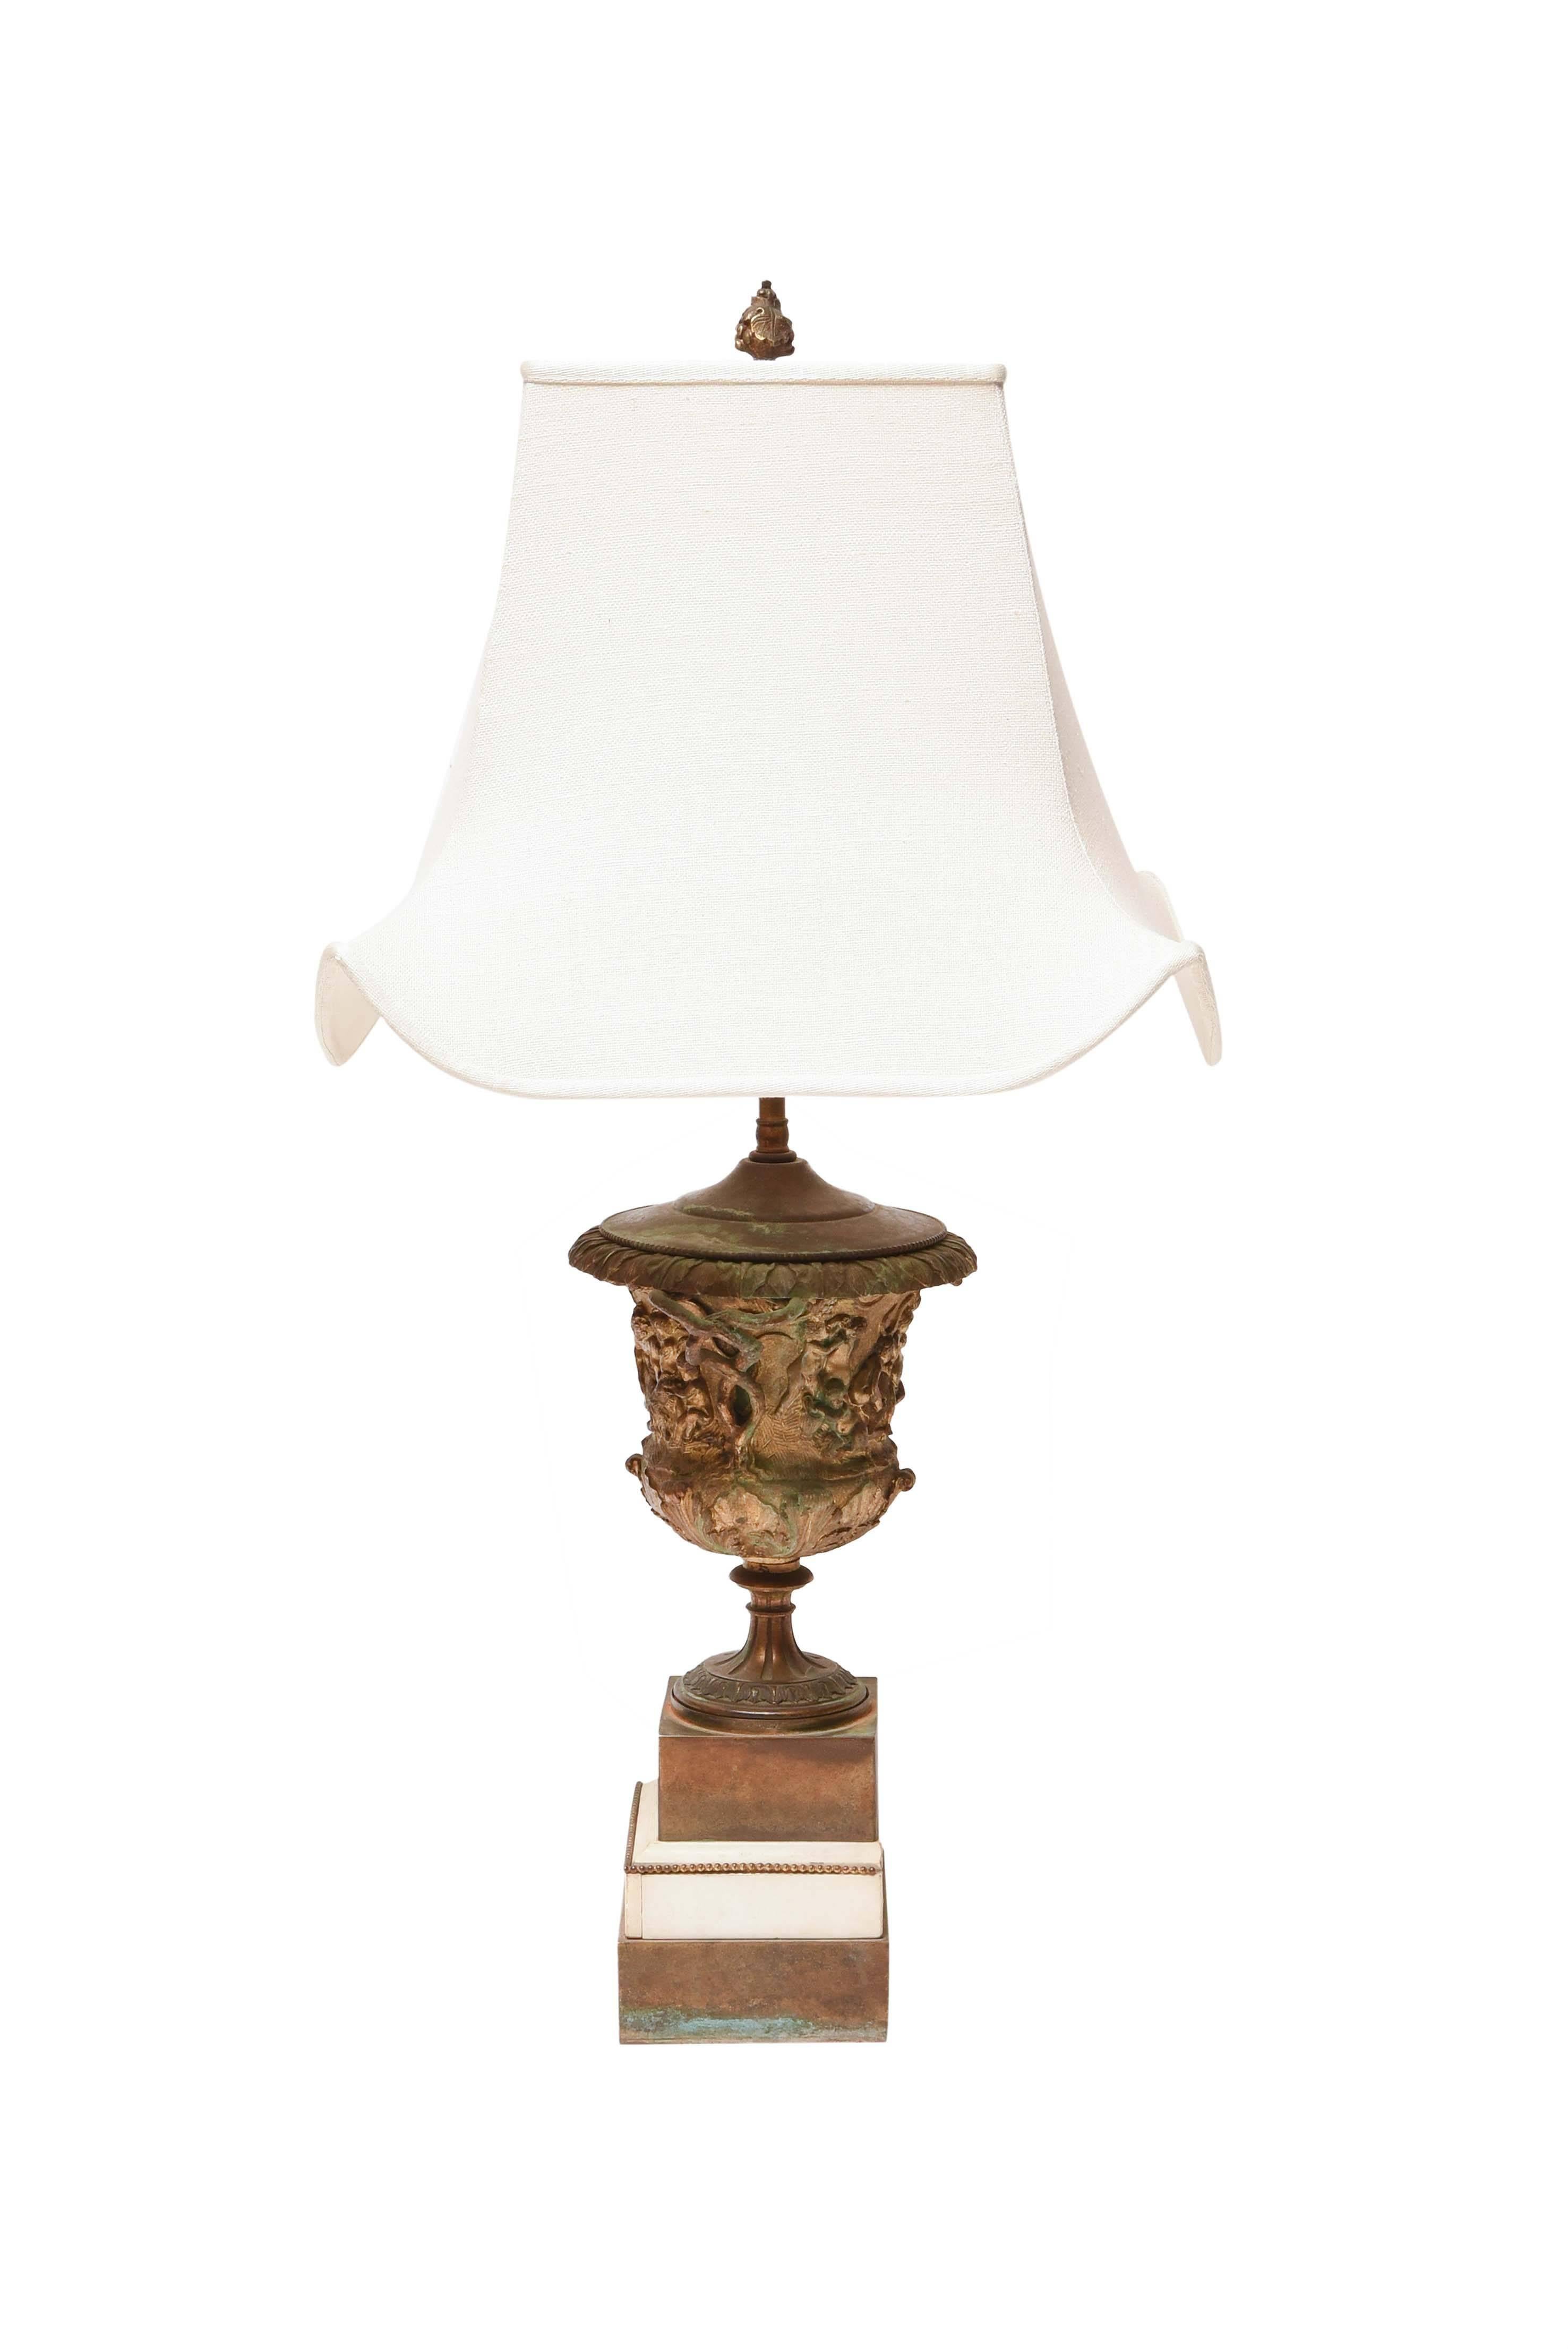 Neoclassic medicei bronze urn table lamp mounted on a marble base.